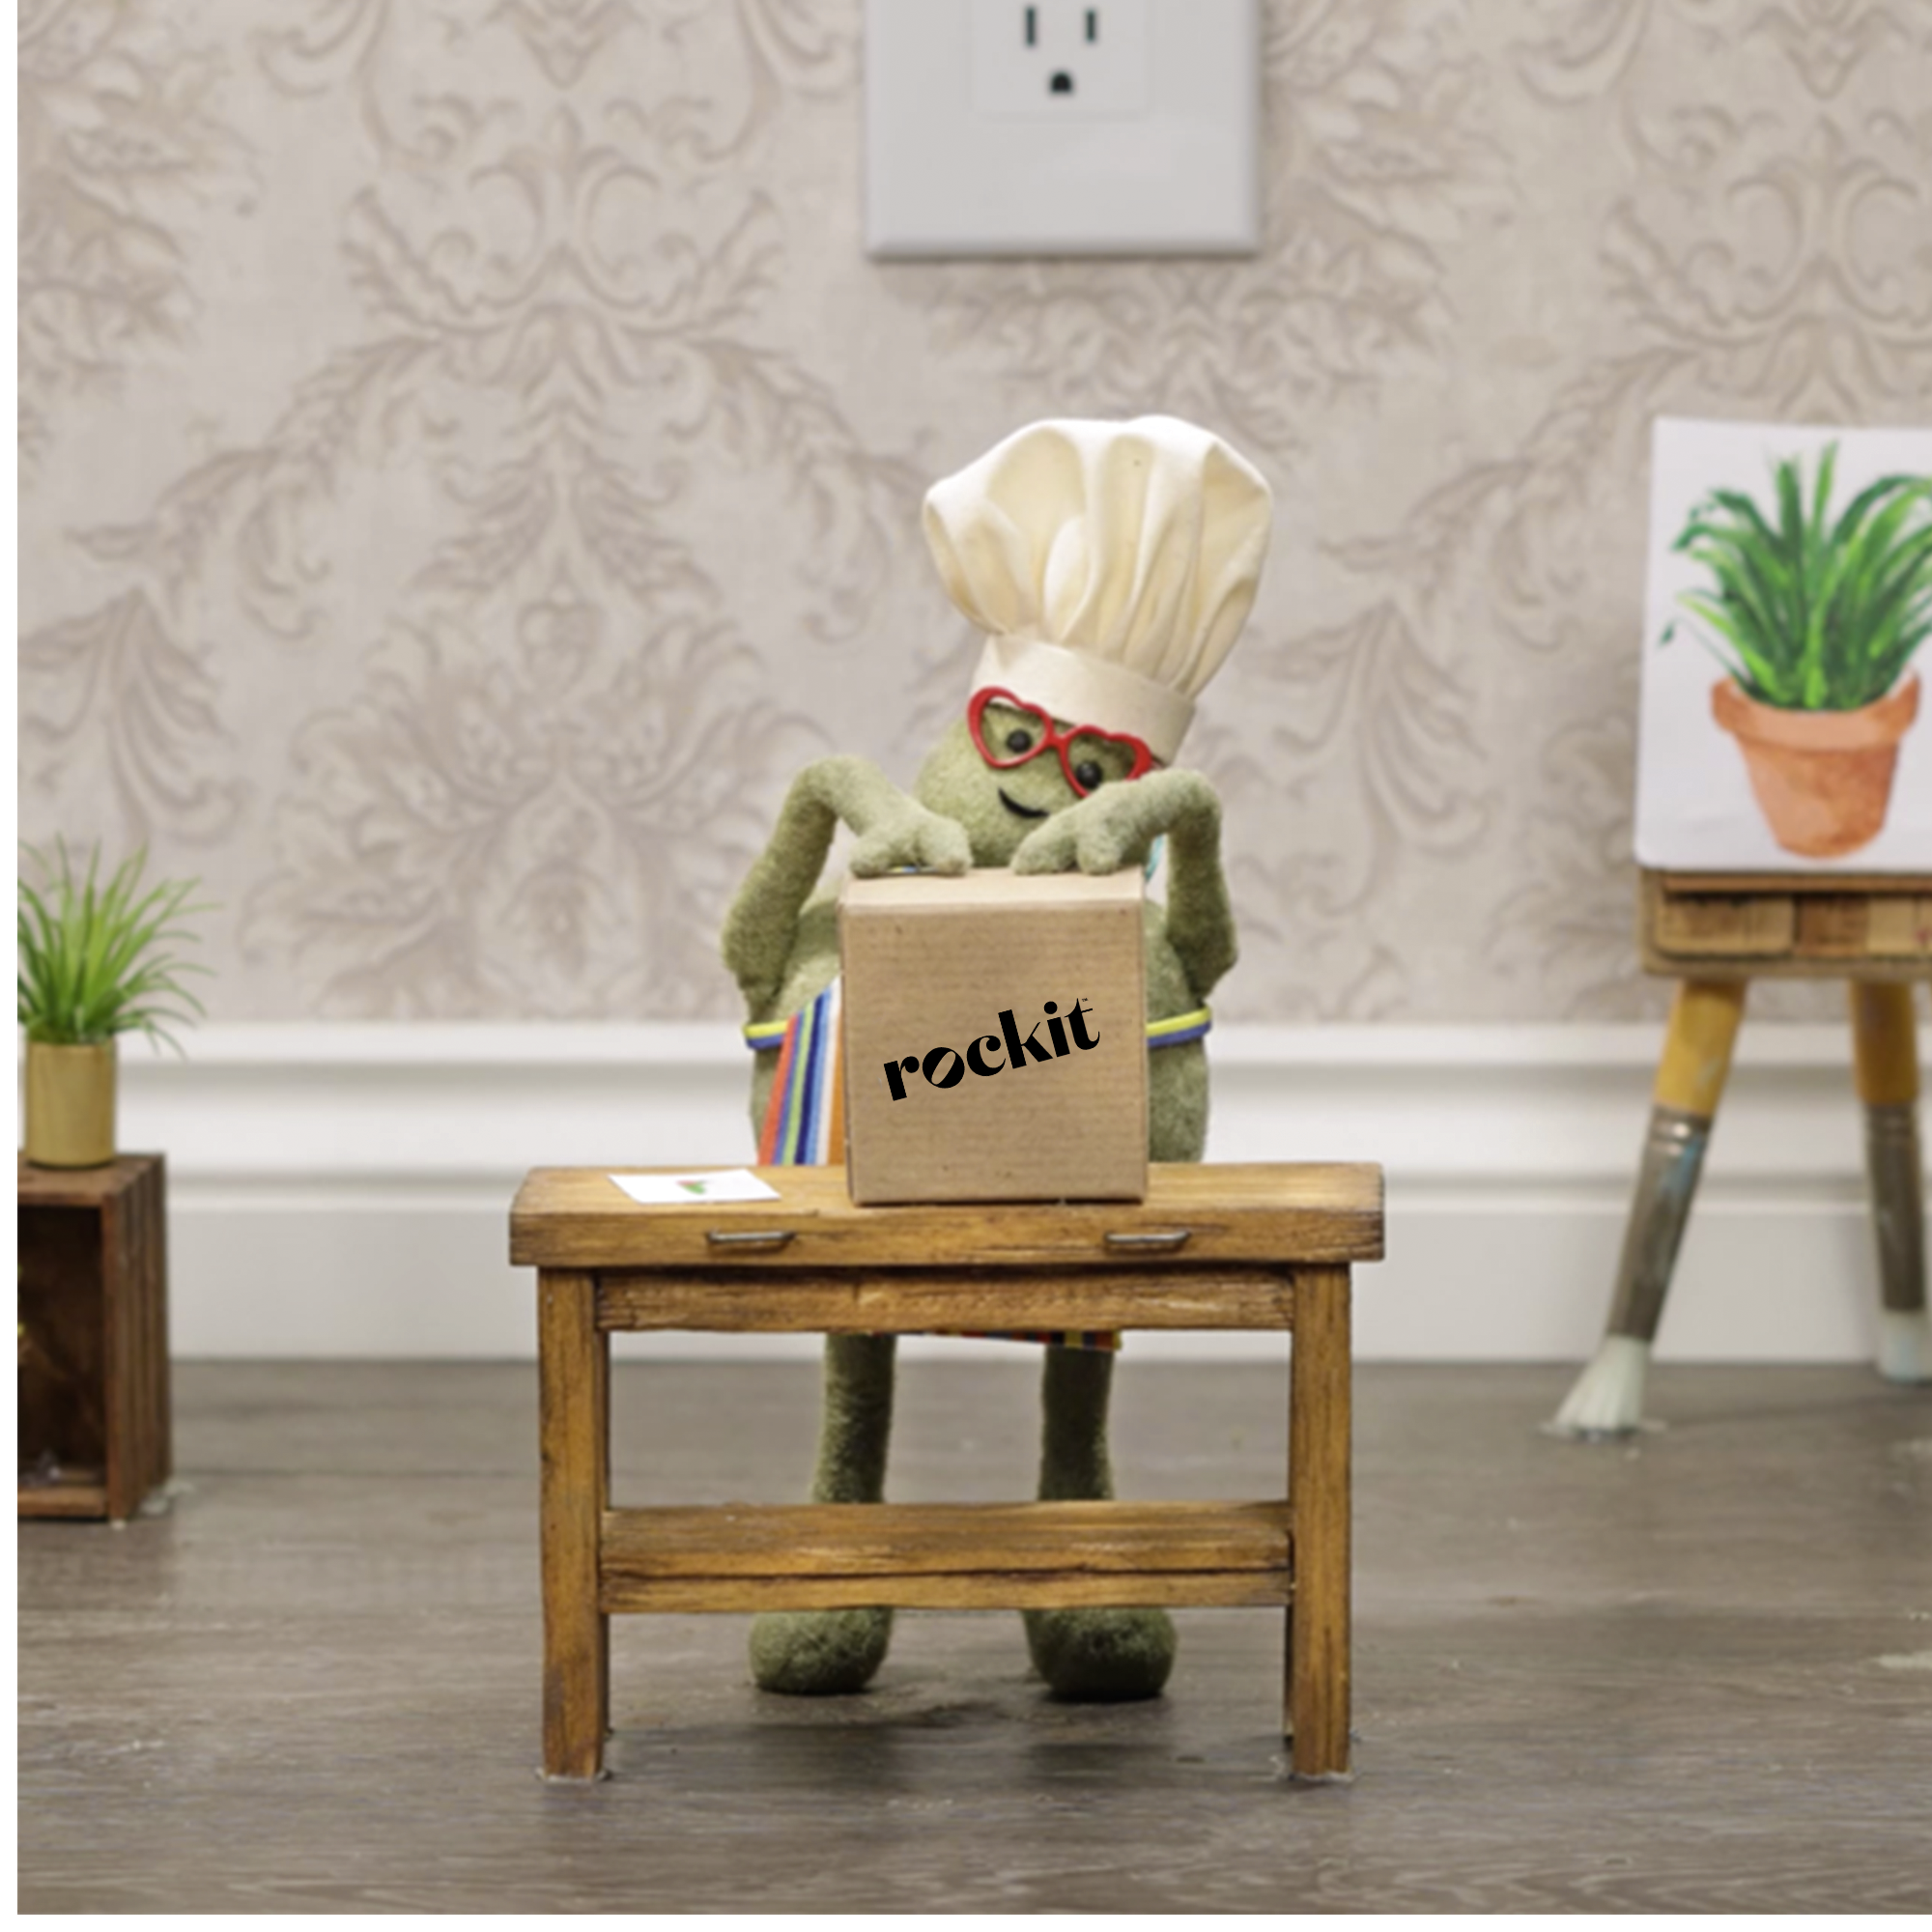 The Tiny Chef opening a brown box that has 'Rockit' written on the front.